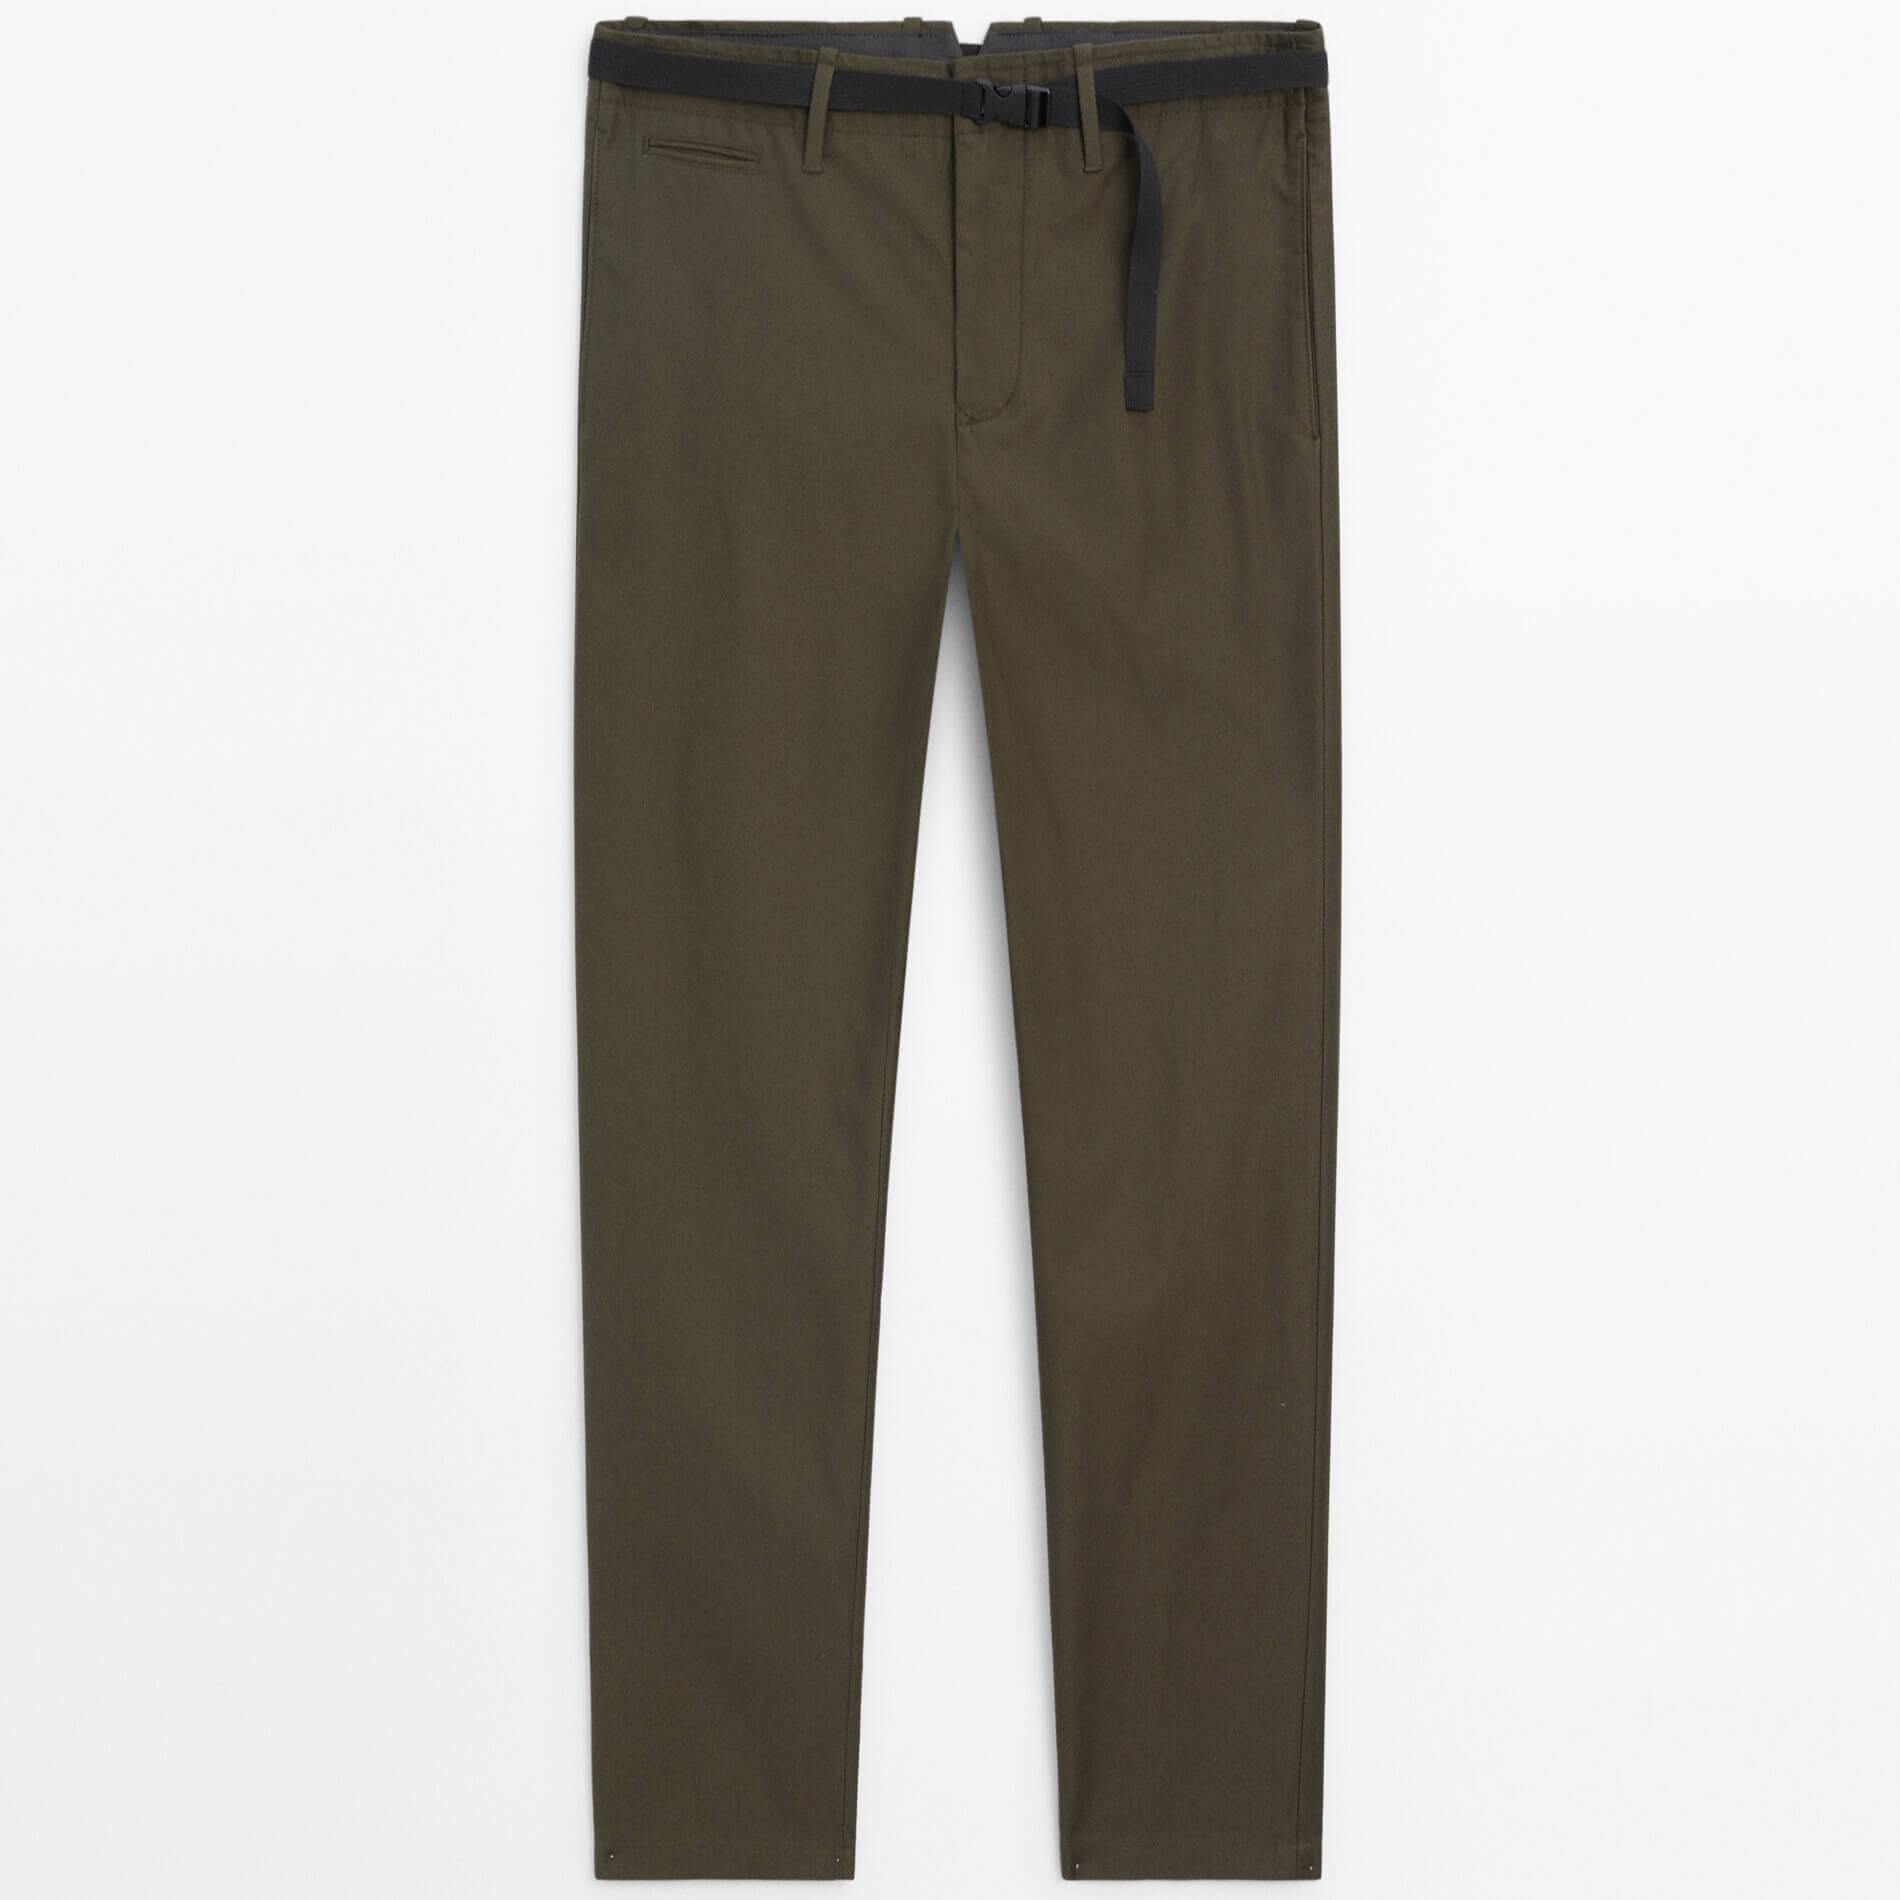 Брюки Massimo Dutti Relaxed Fit Belted Chino, хаки брюки чинос massimo dutti relaxed fit wool limited edition тёмно синий размер s